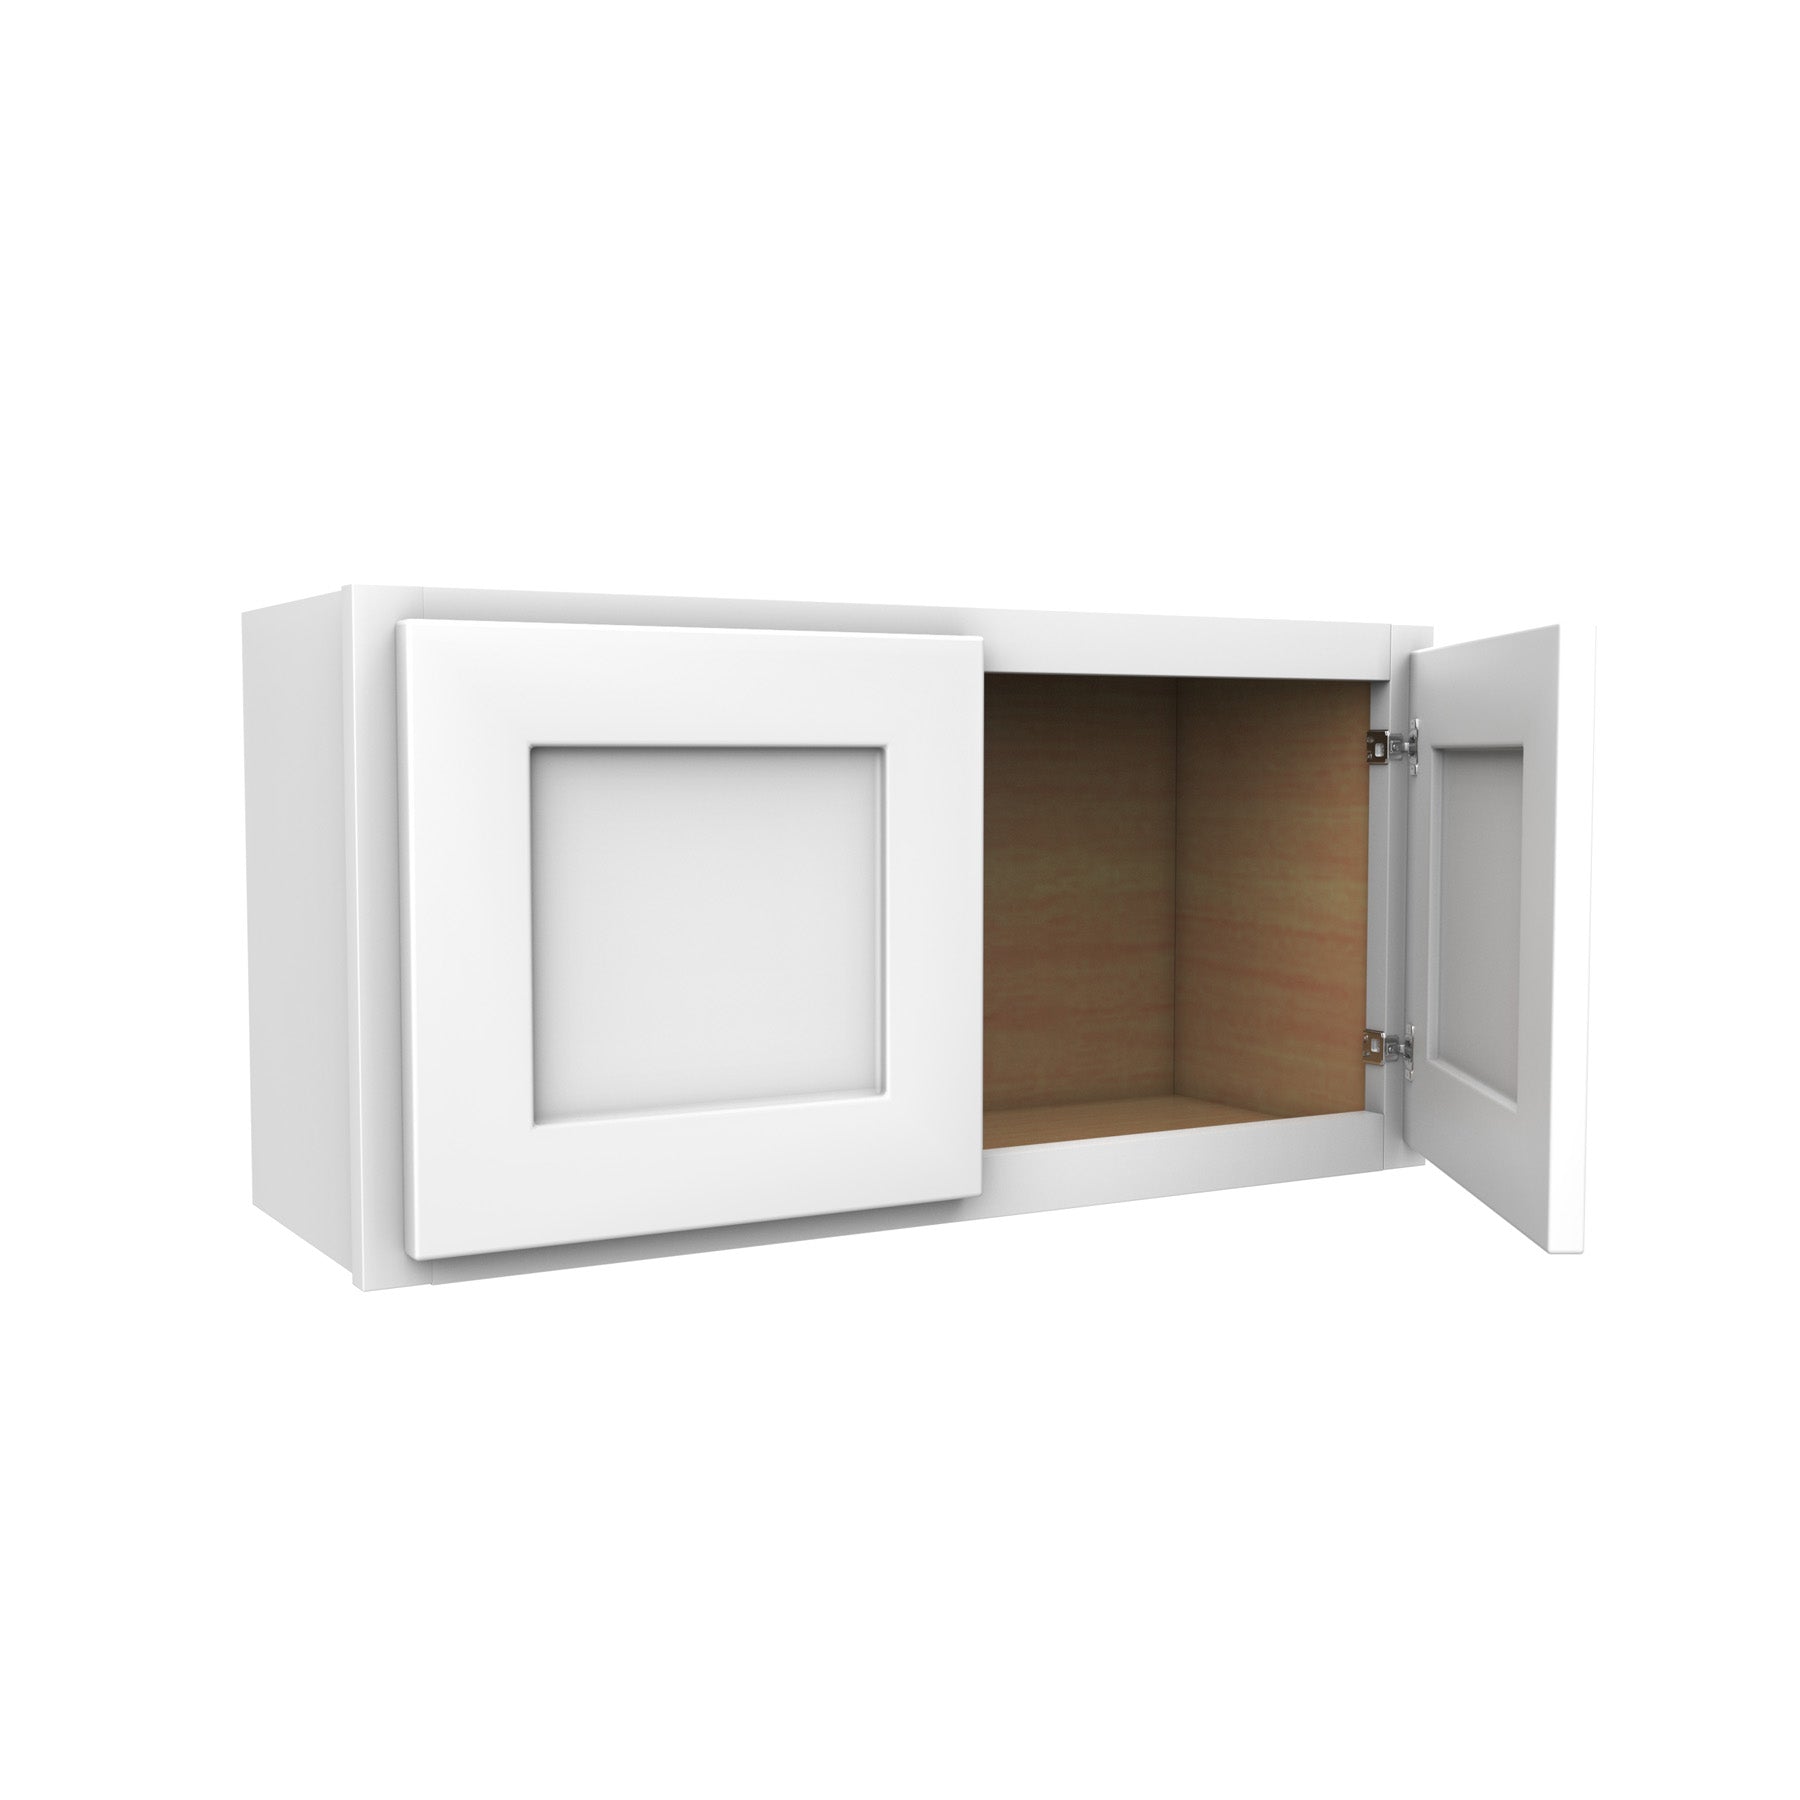 15 Inch High Double Door Wall Cabinet - Luxor White Shaker - Ready To Assemble, 30"W x 15"H x 12"D